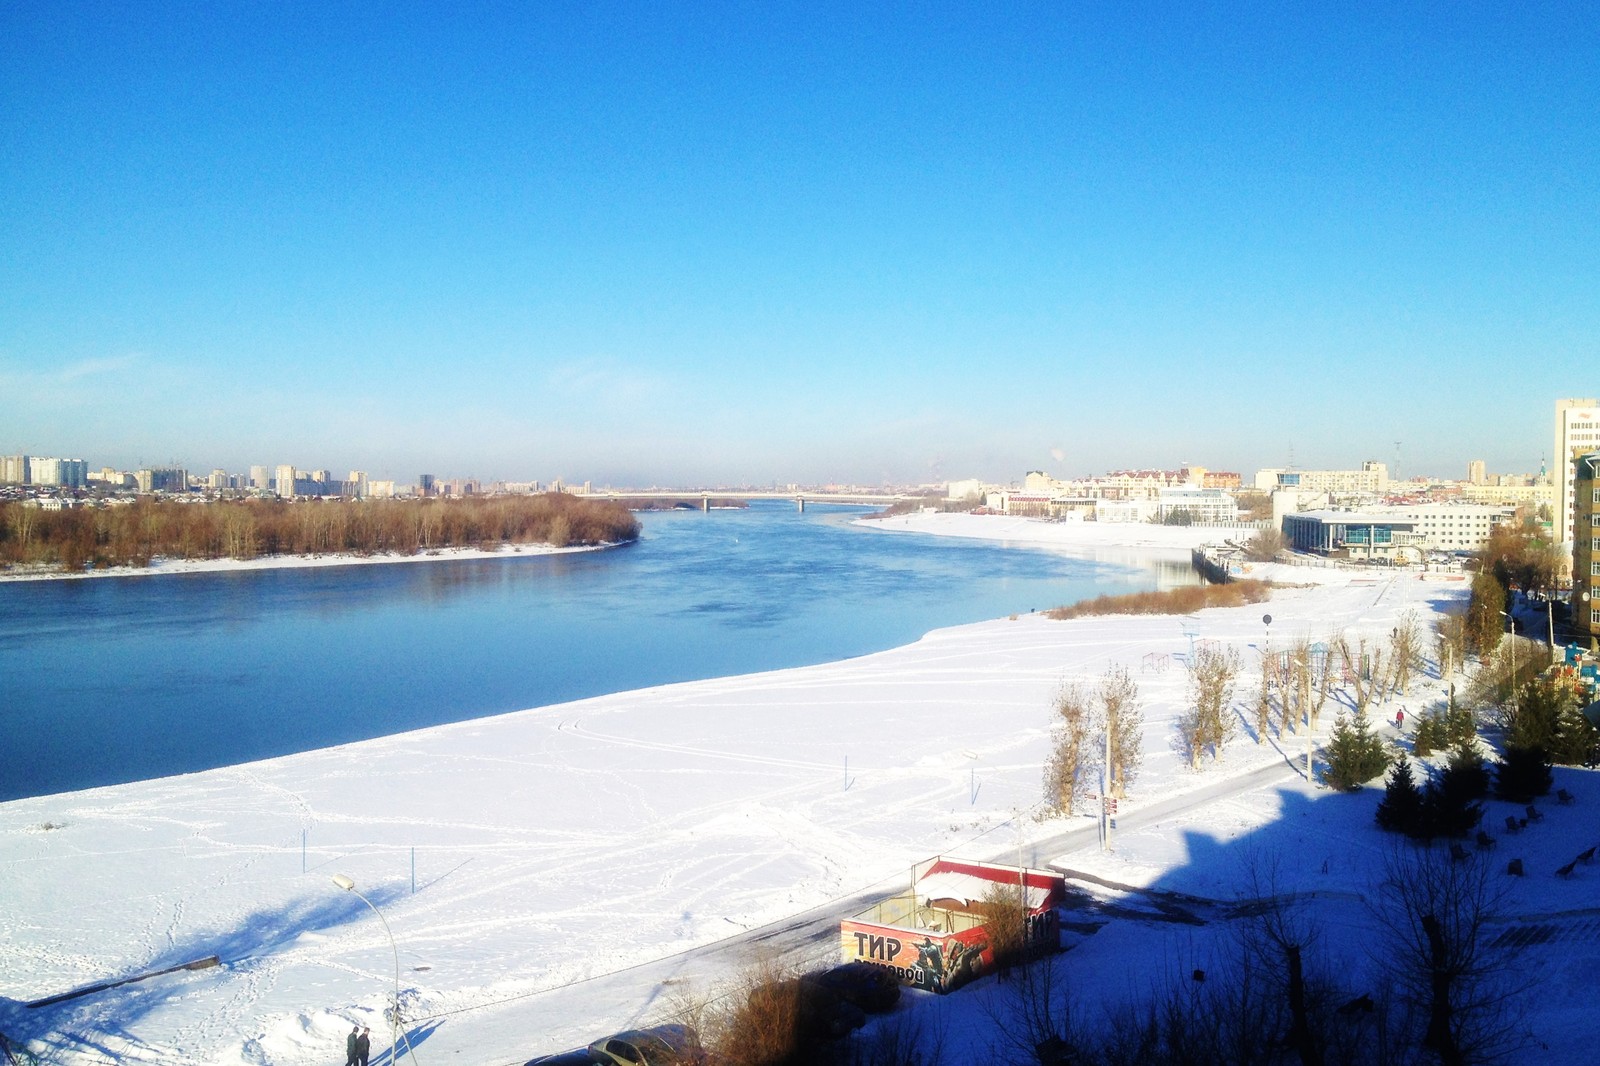 I've been living with this view for 15 years, and I still can't stop looking at it. - My, Omsk, Irtysh, Embankment, View from the balcony, Seasons, Russia, Beach, Snow, Longpost